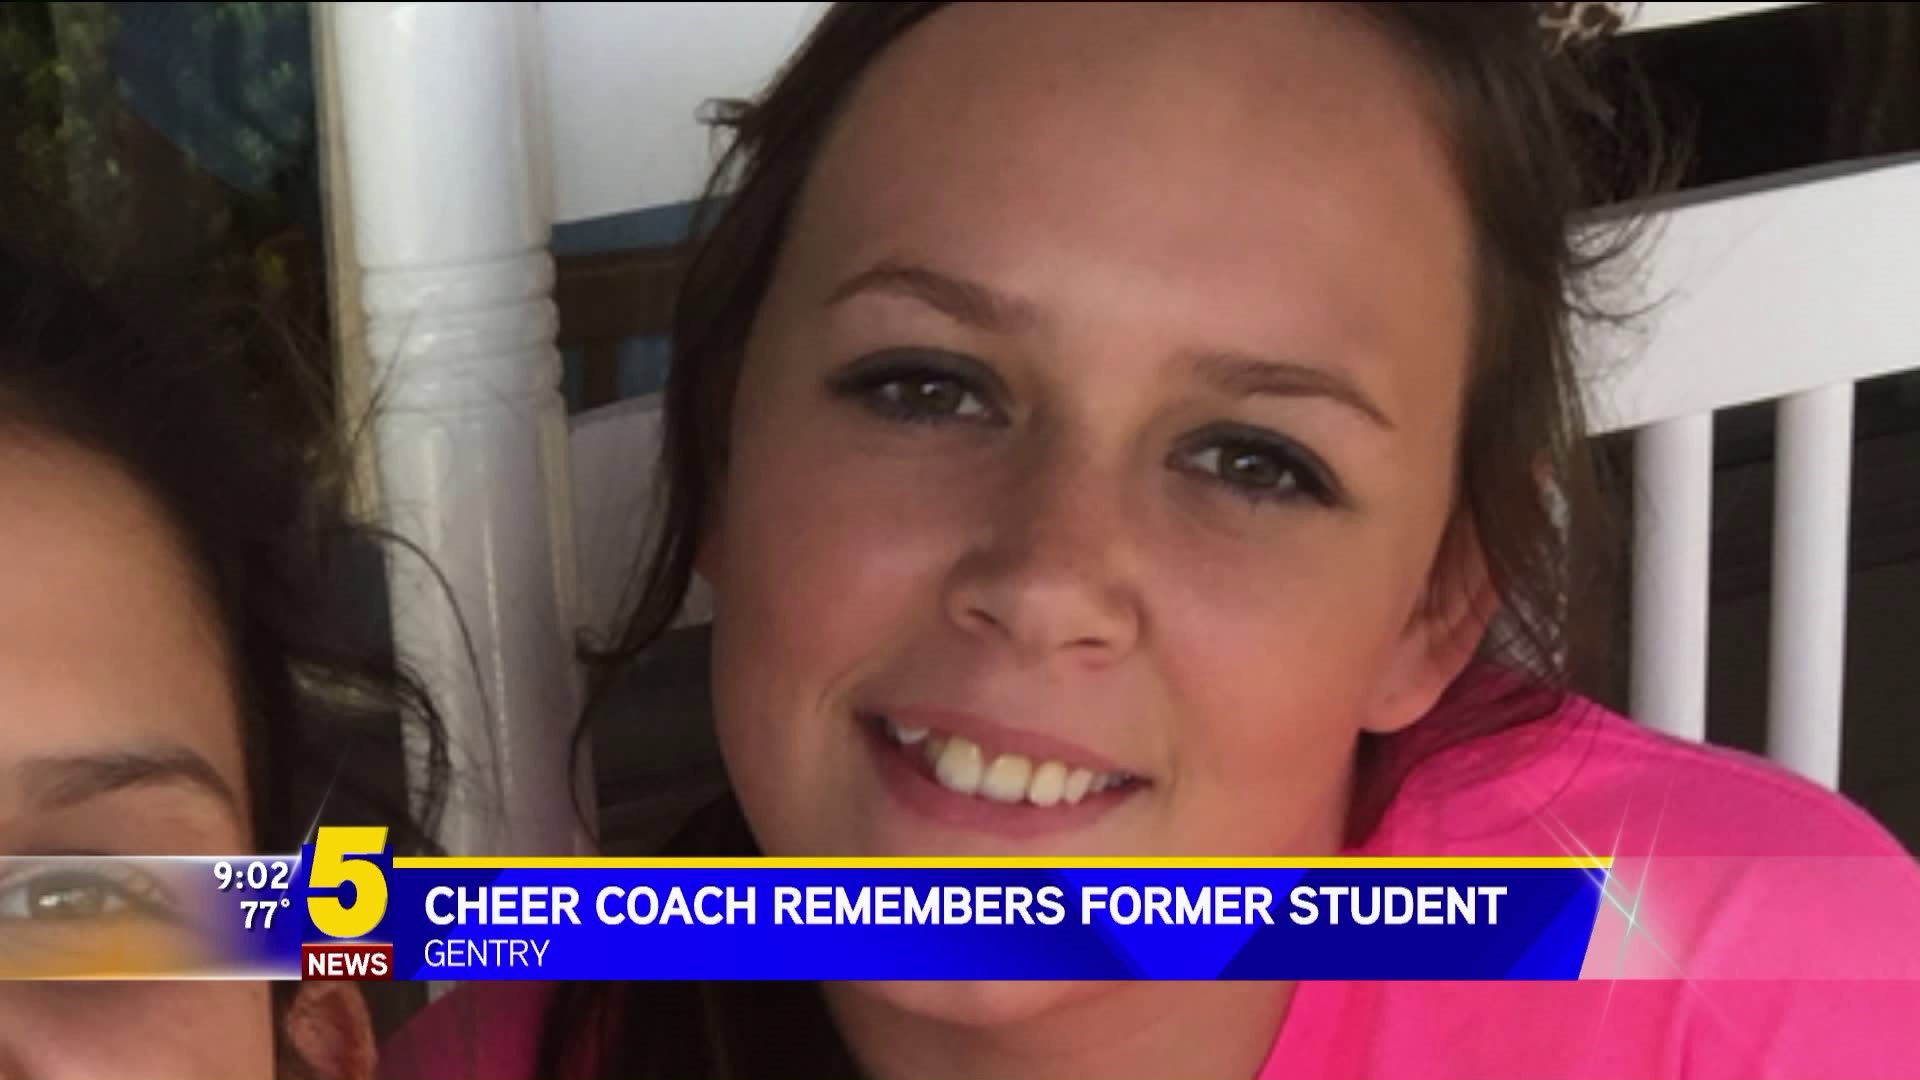 Cheer Coach Remembers Former Student